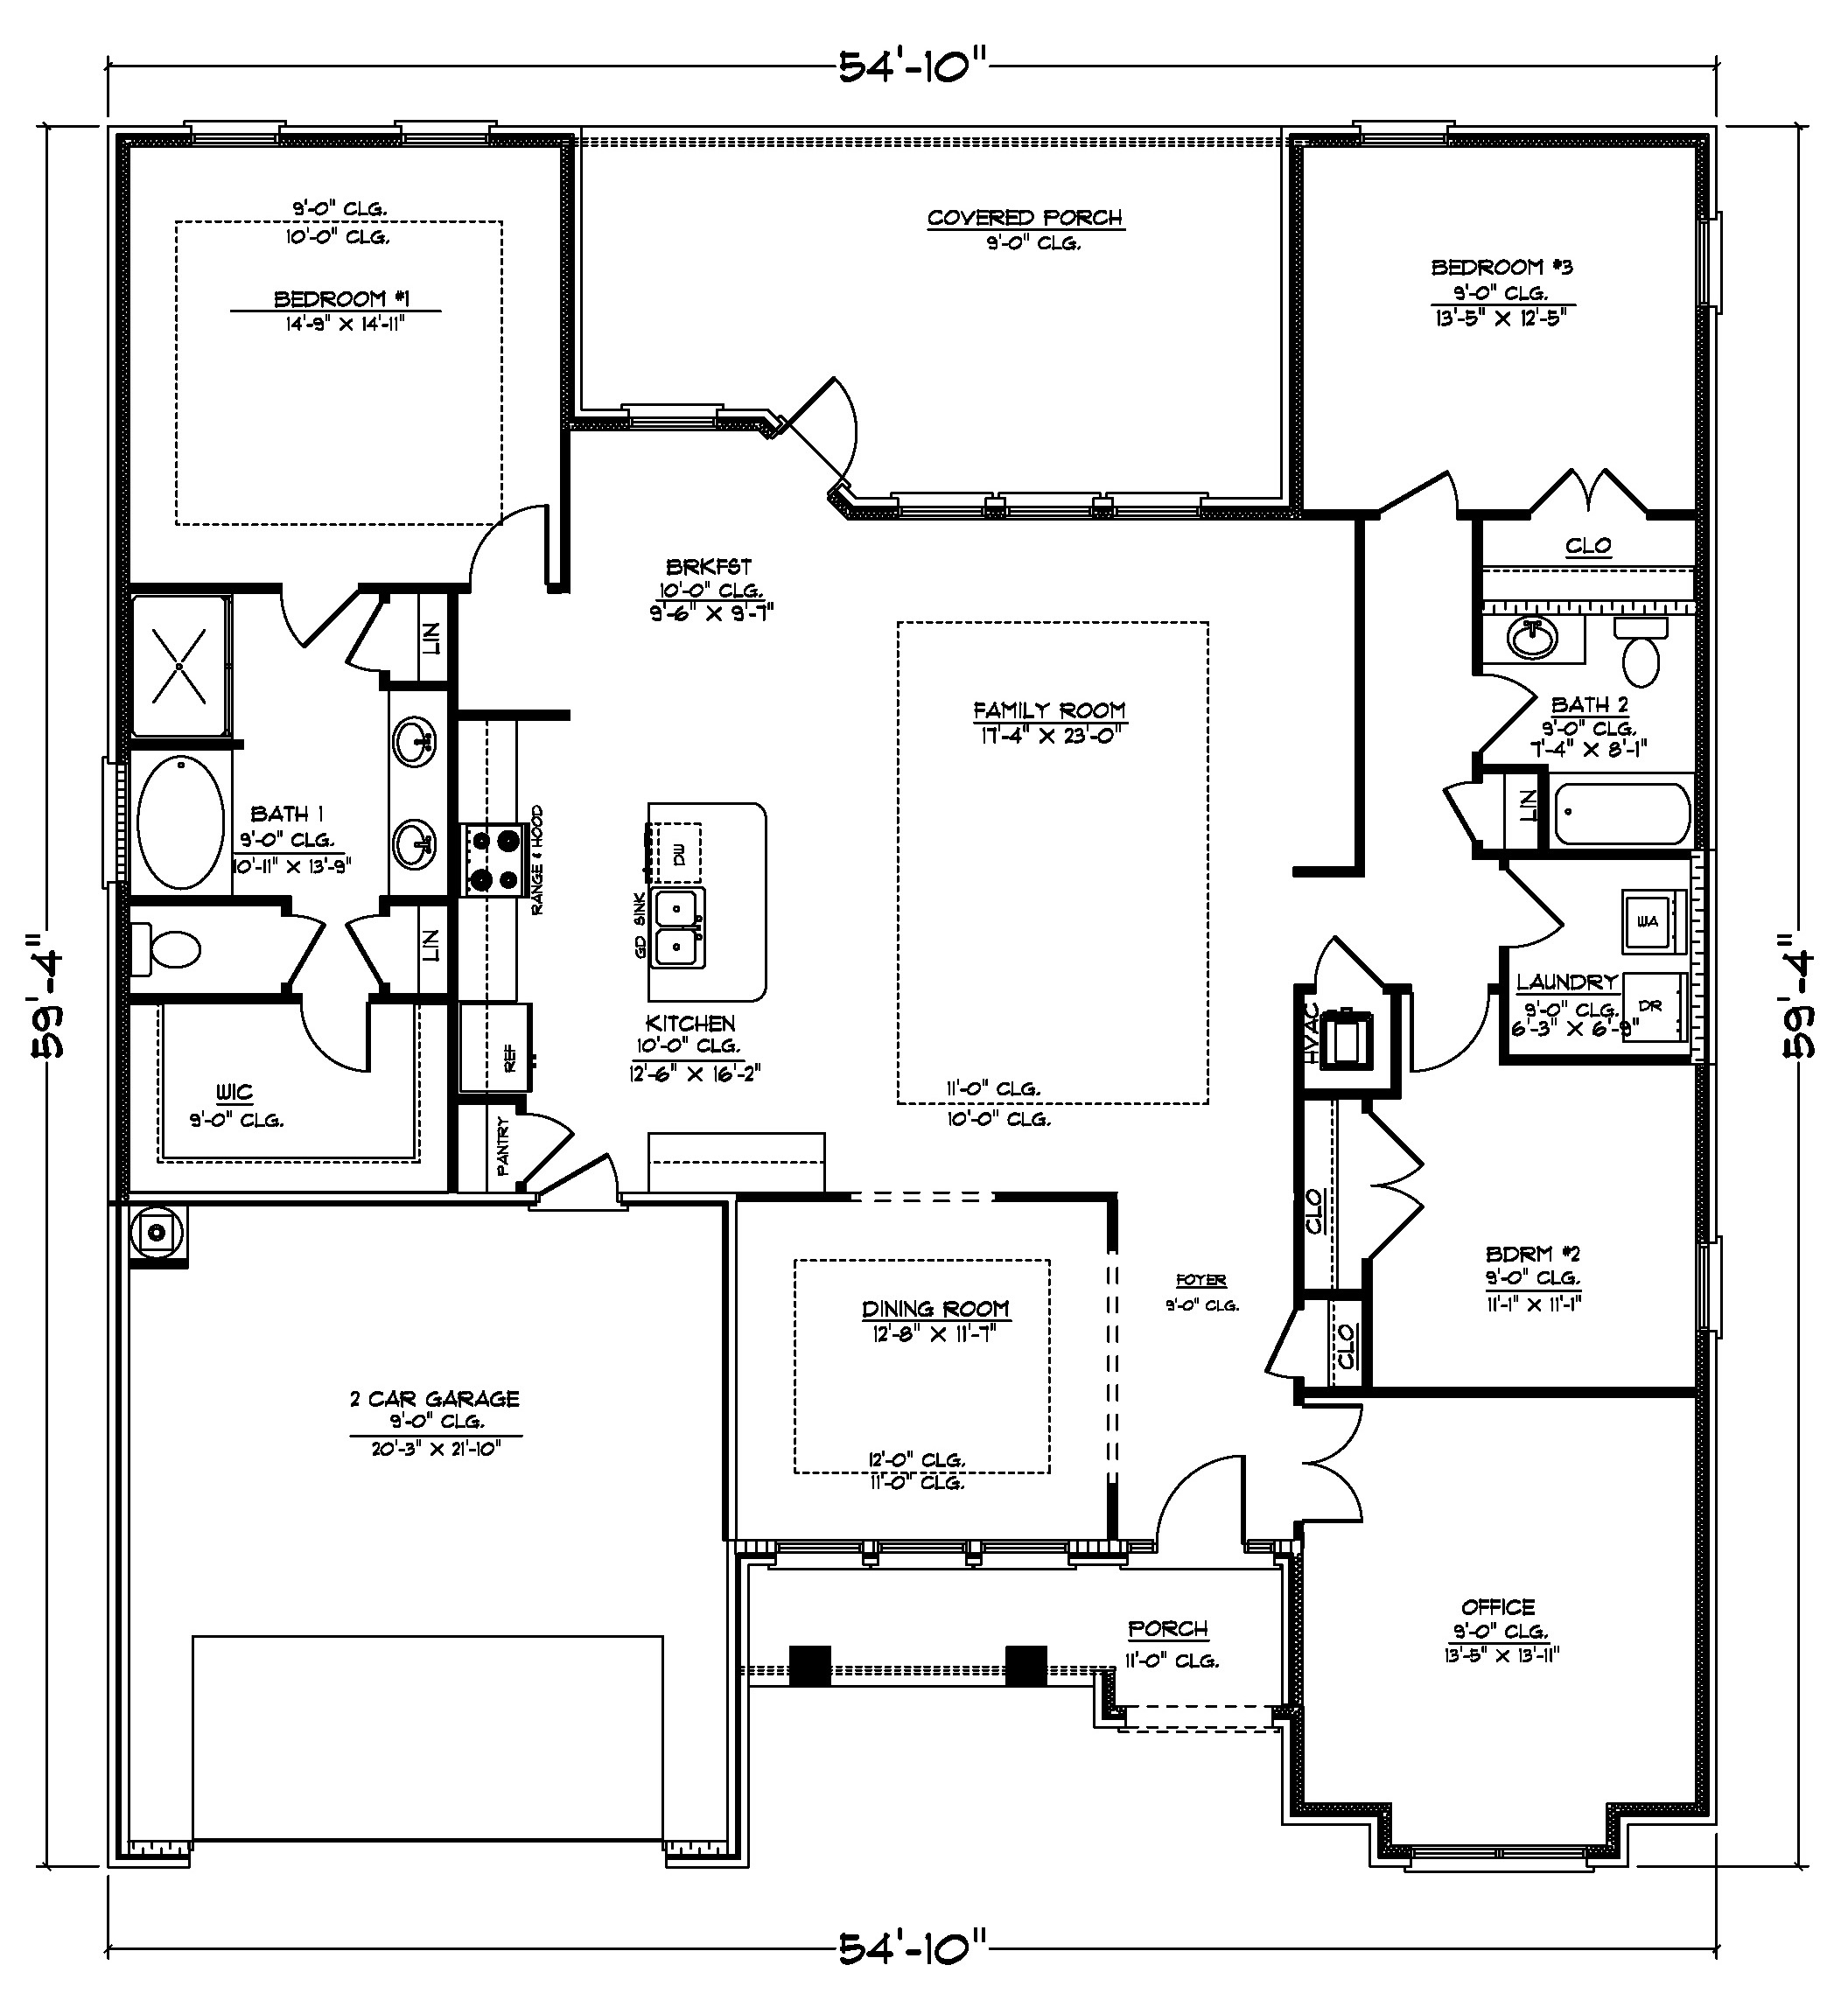 The Emma C front entrance floor plan layout.